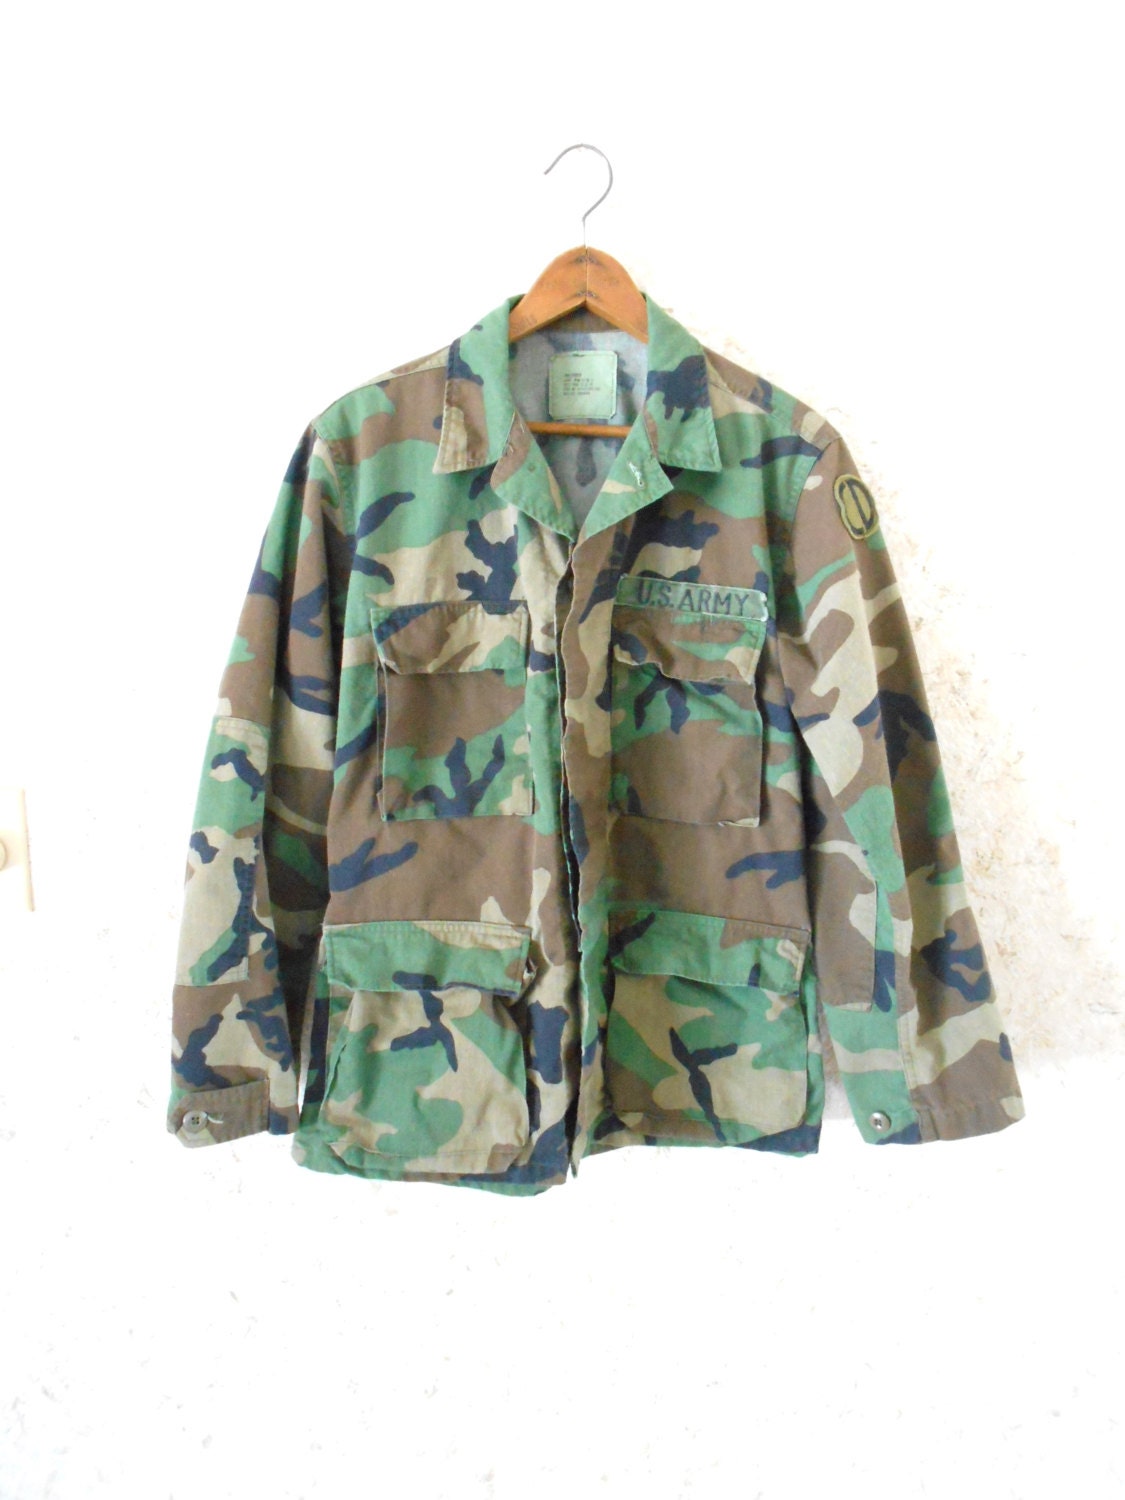 Vtg 90s US Army Military Issue Camo Field Jacket Coat Button